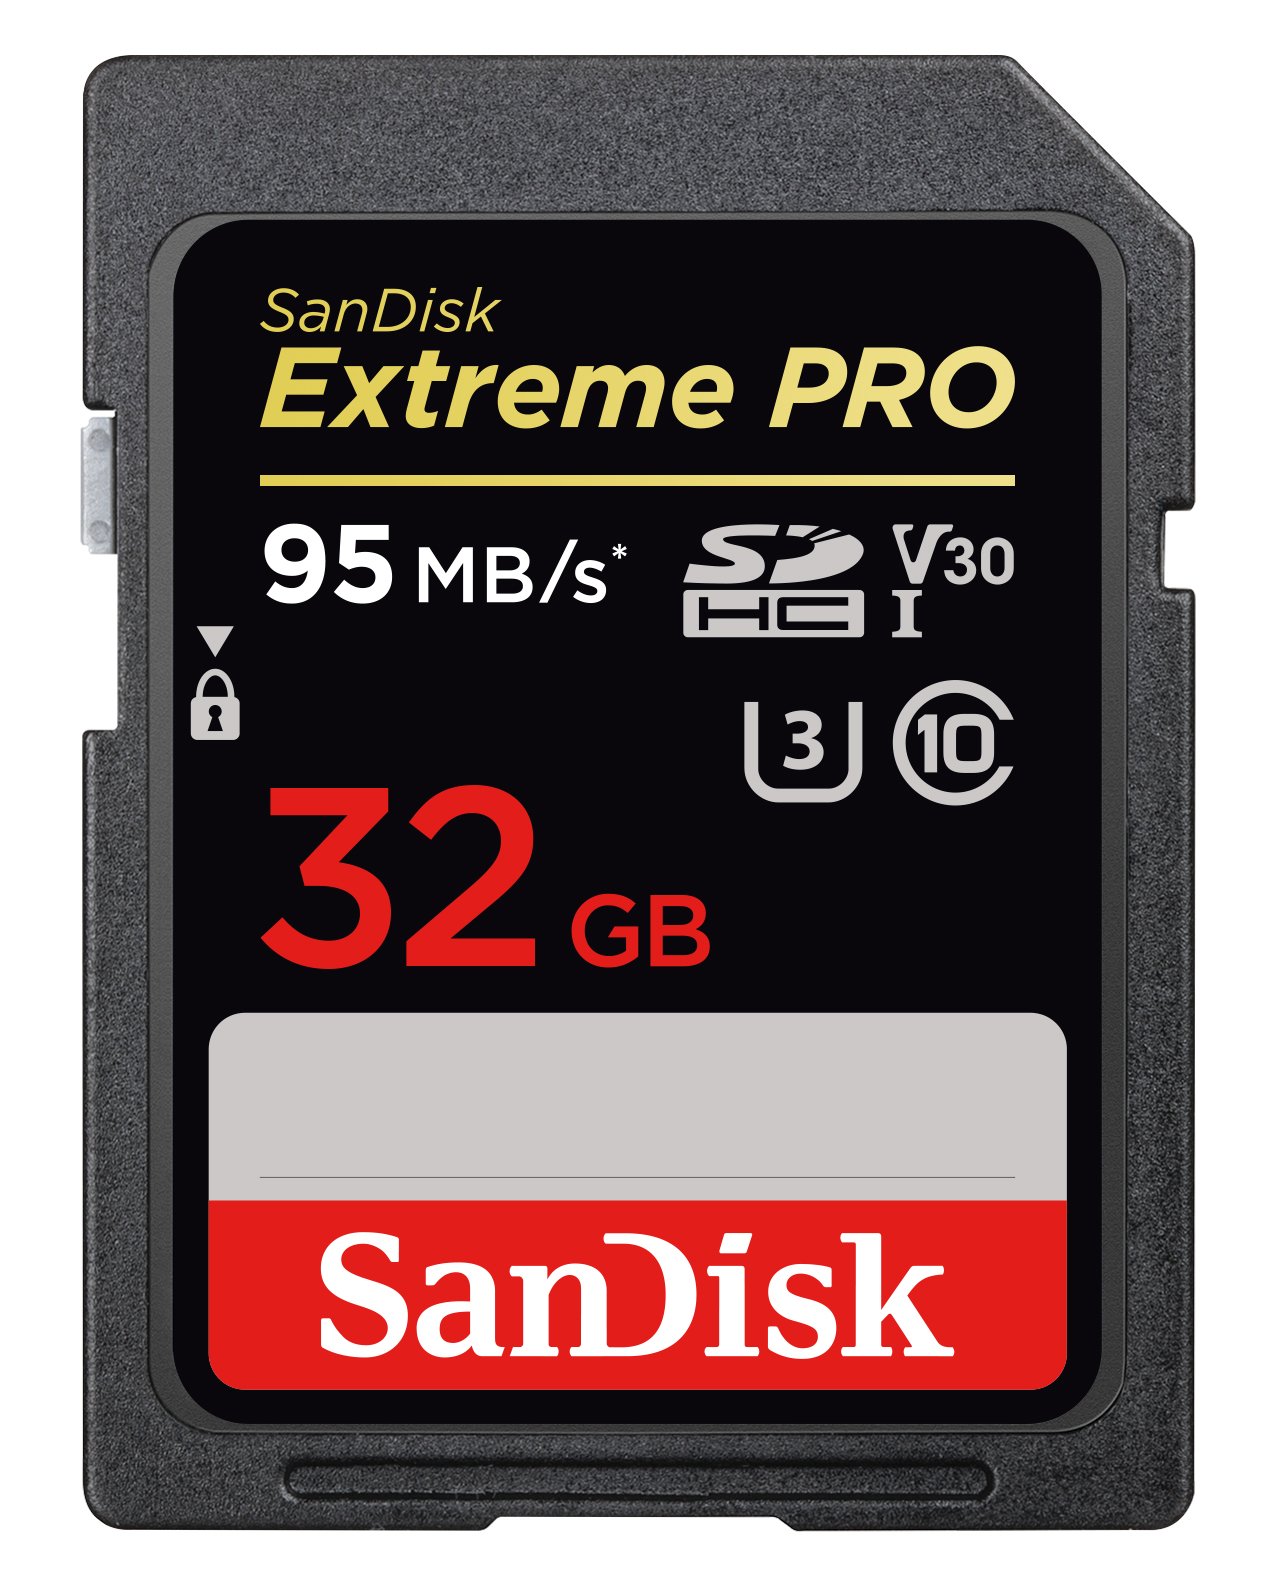 32GB SanDisk サンディスク Extreme Pro SDHC UHS-I U3 V30対応 R95MBs 海外リテール SDSDXXG-032G-GN4IN 並